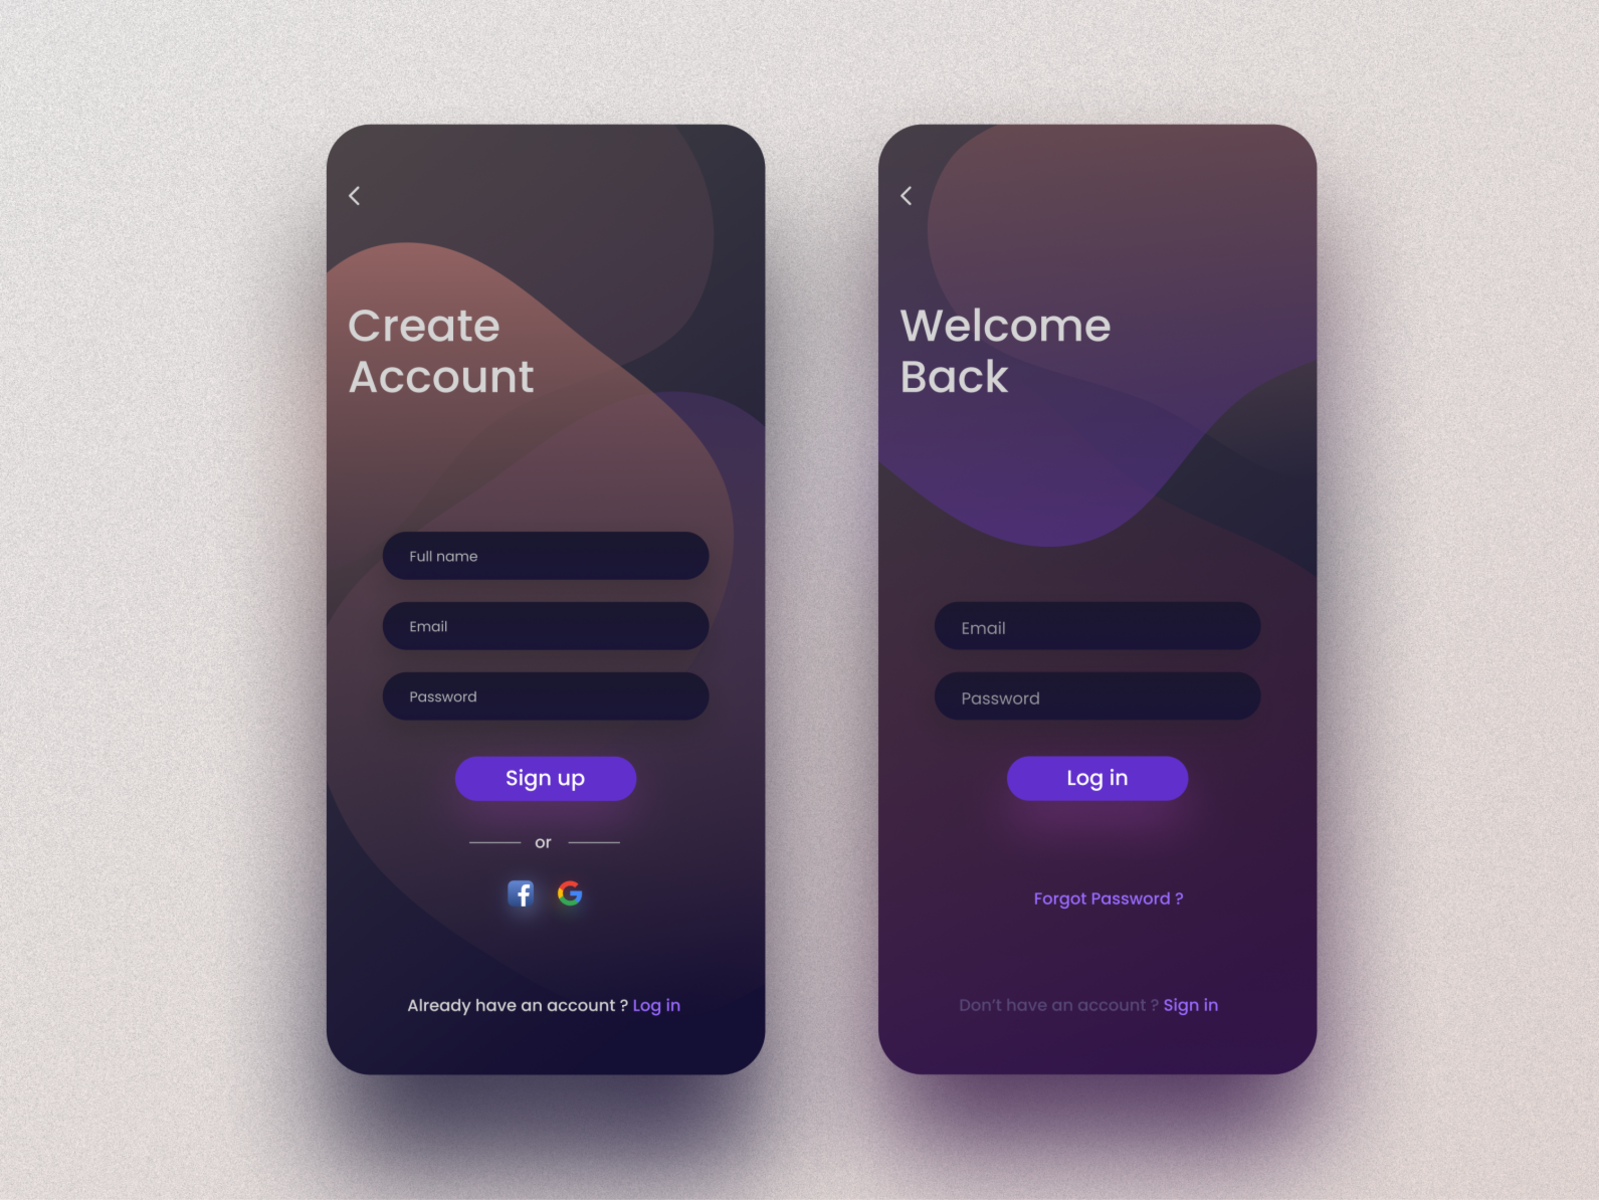 Sign in / Sign up UI by Siddharth Chakraborty on Dribbble